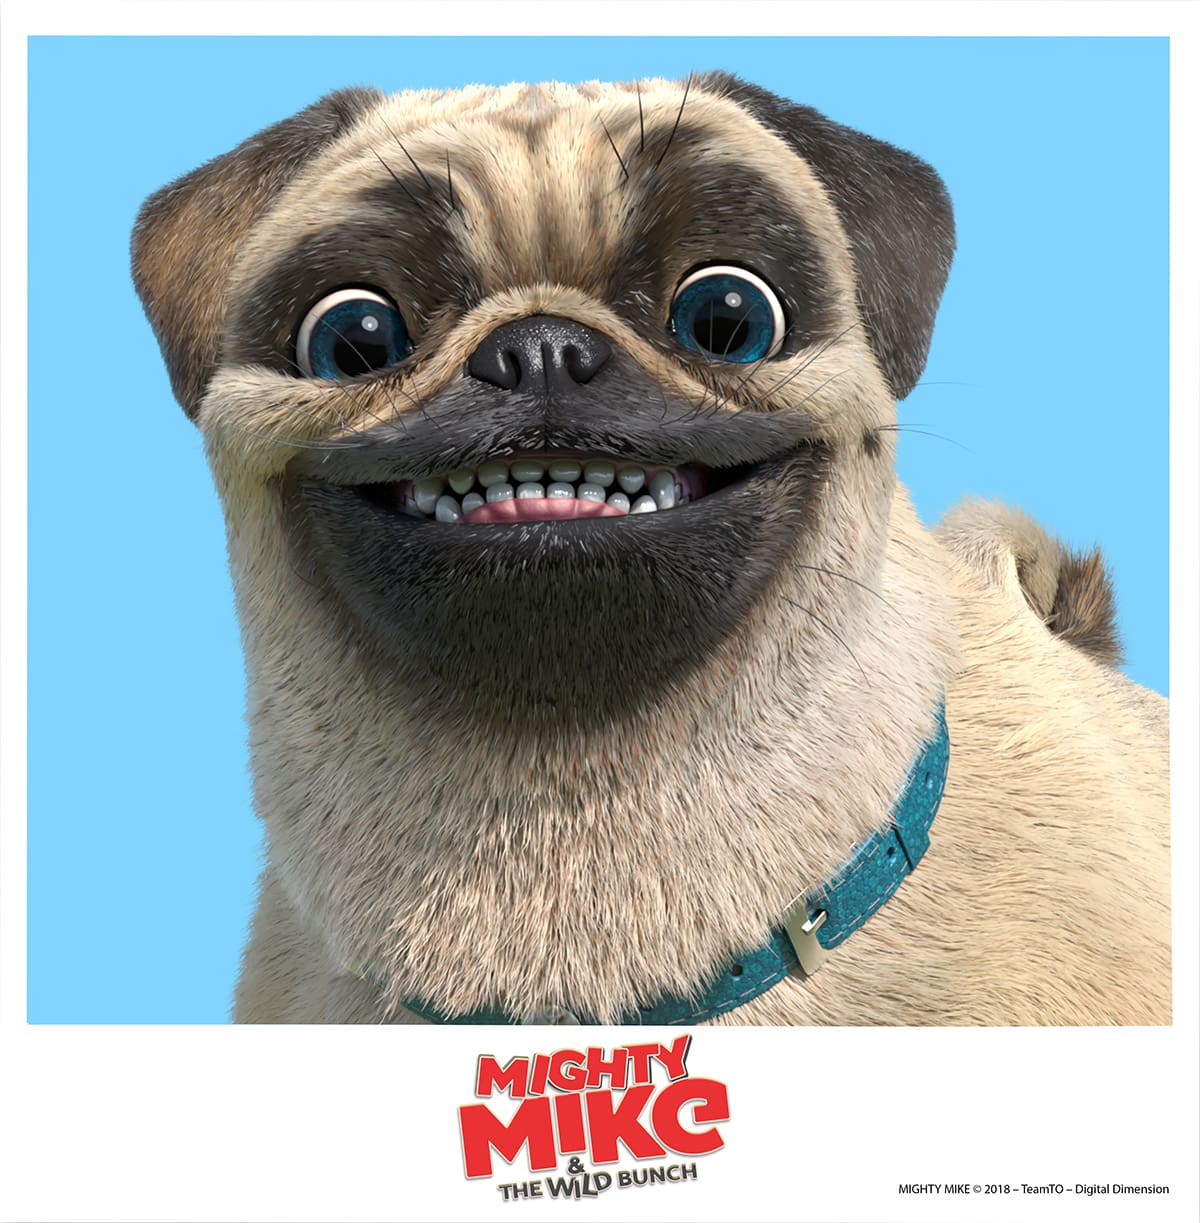 French Studio TeamTO Built New Animation Software For Its Hyper-real  Slapstick Series 'Mighty Mike'